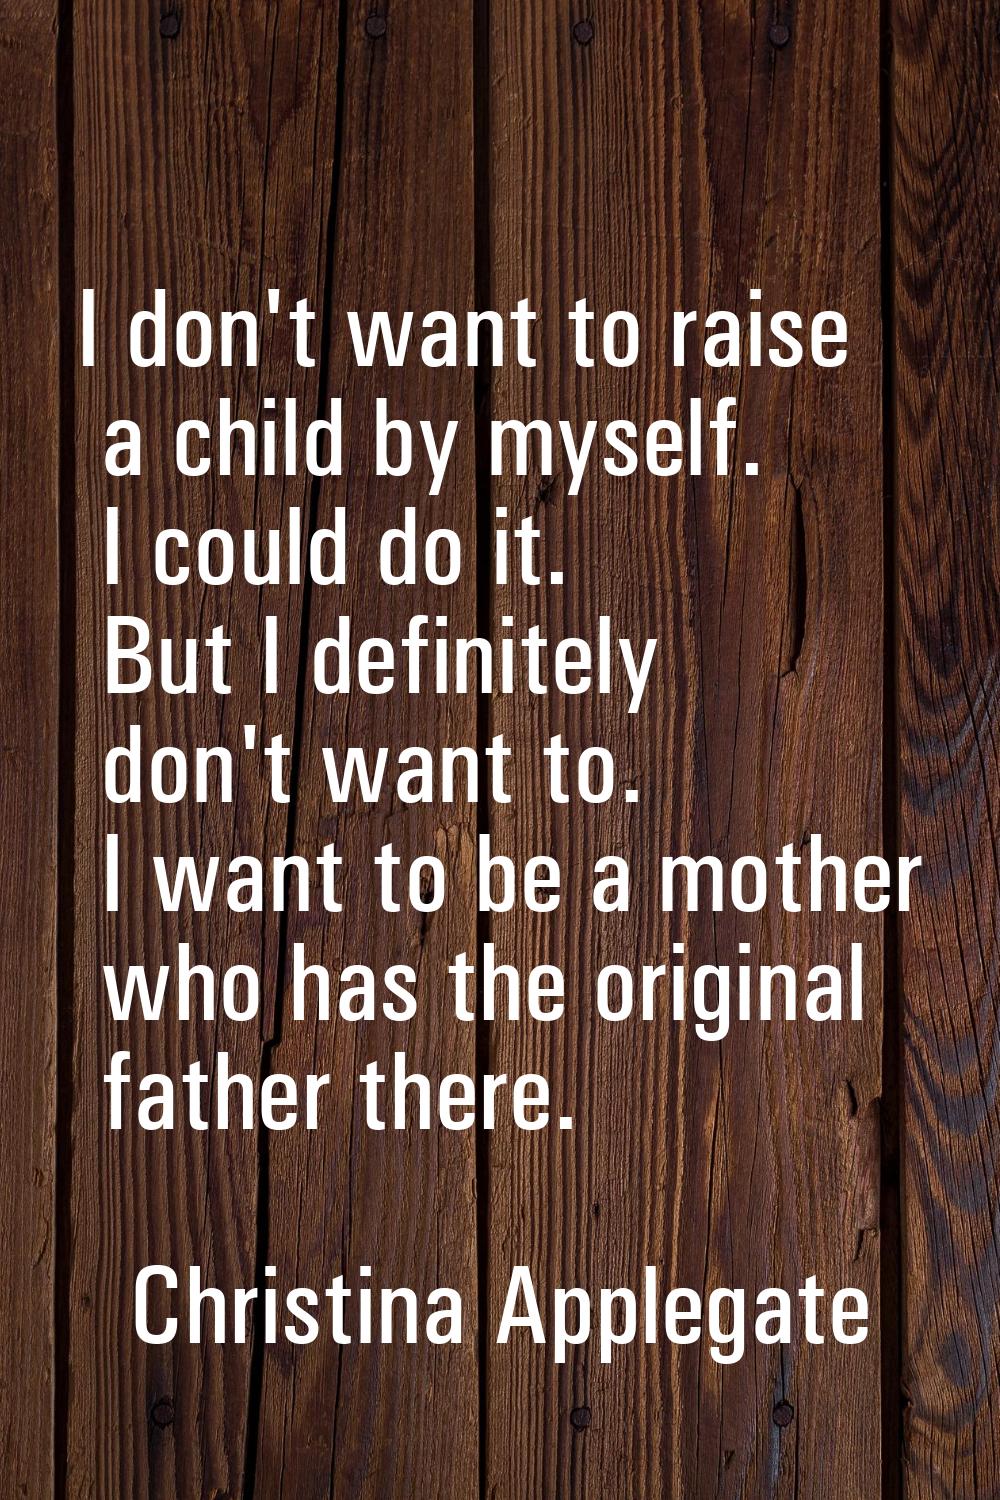 I don't want to raise a child by myself. I could do it. But I definitely don't want to. I want to b